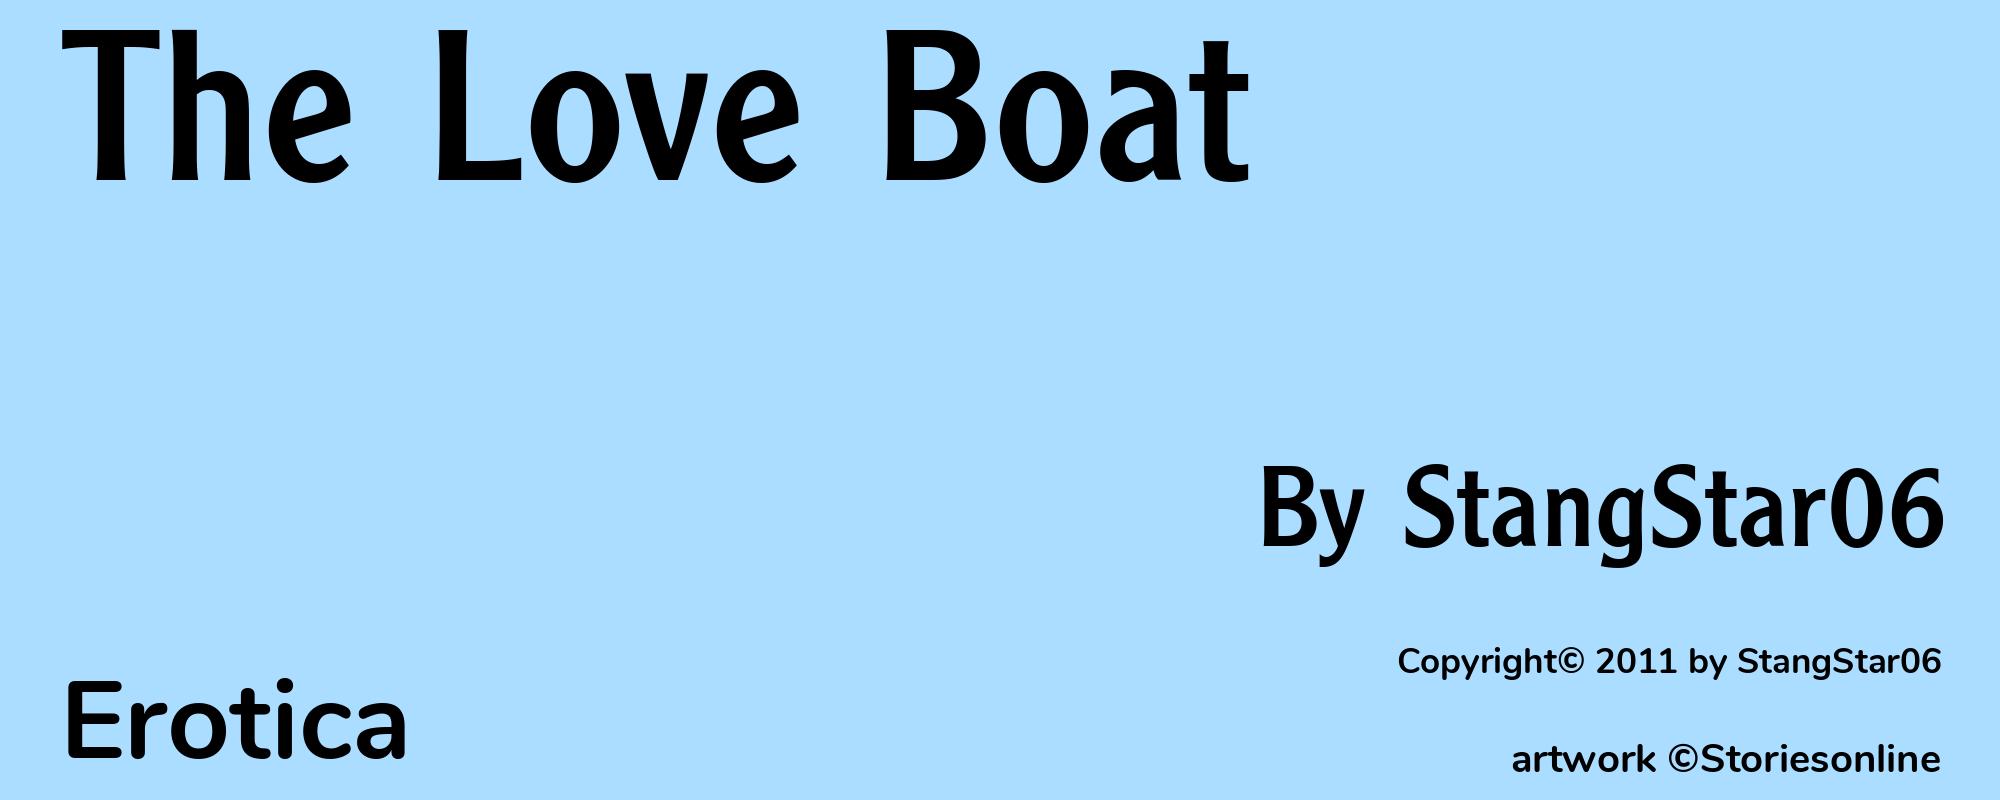 The Love Boat - Cover